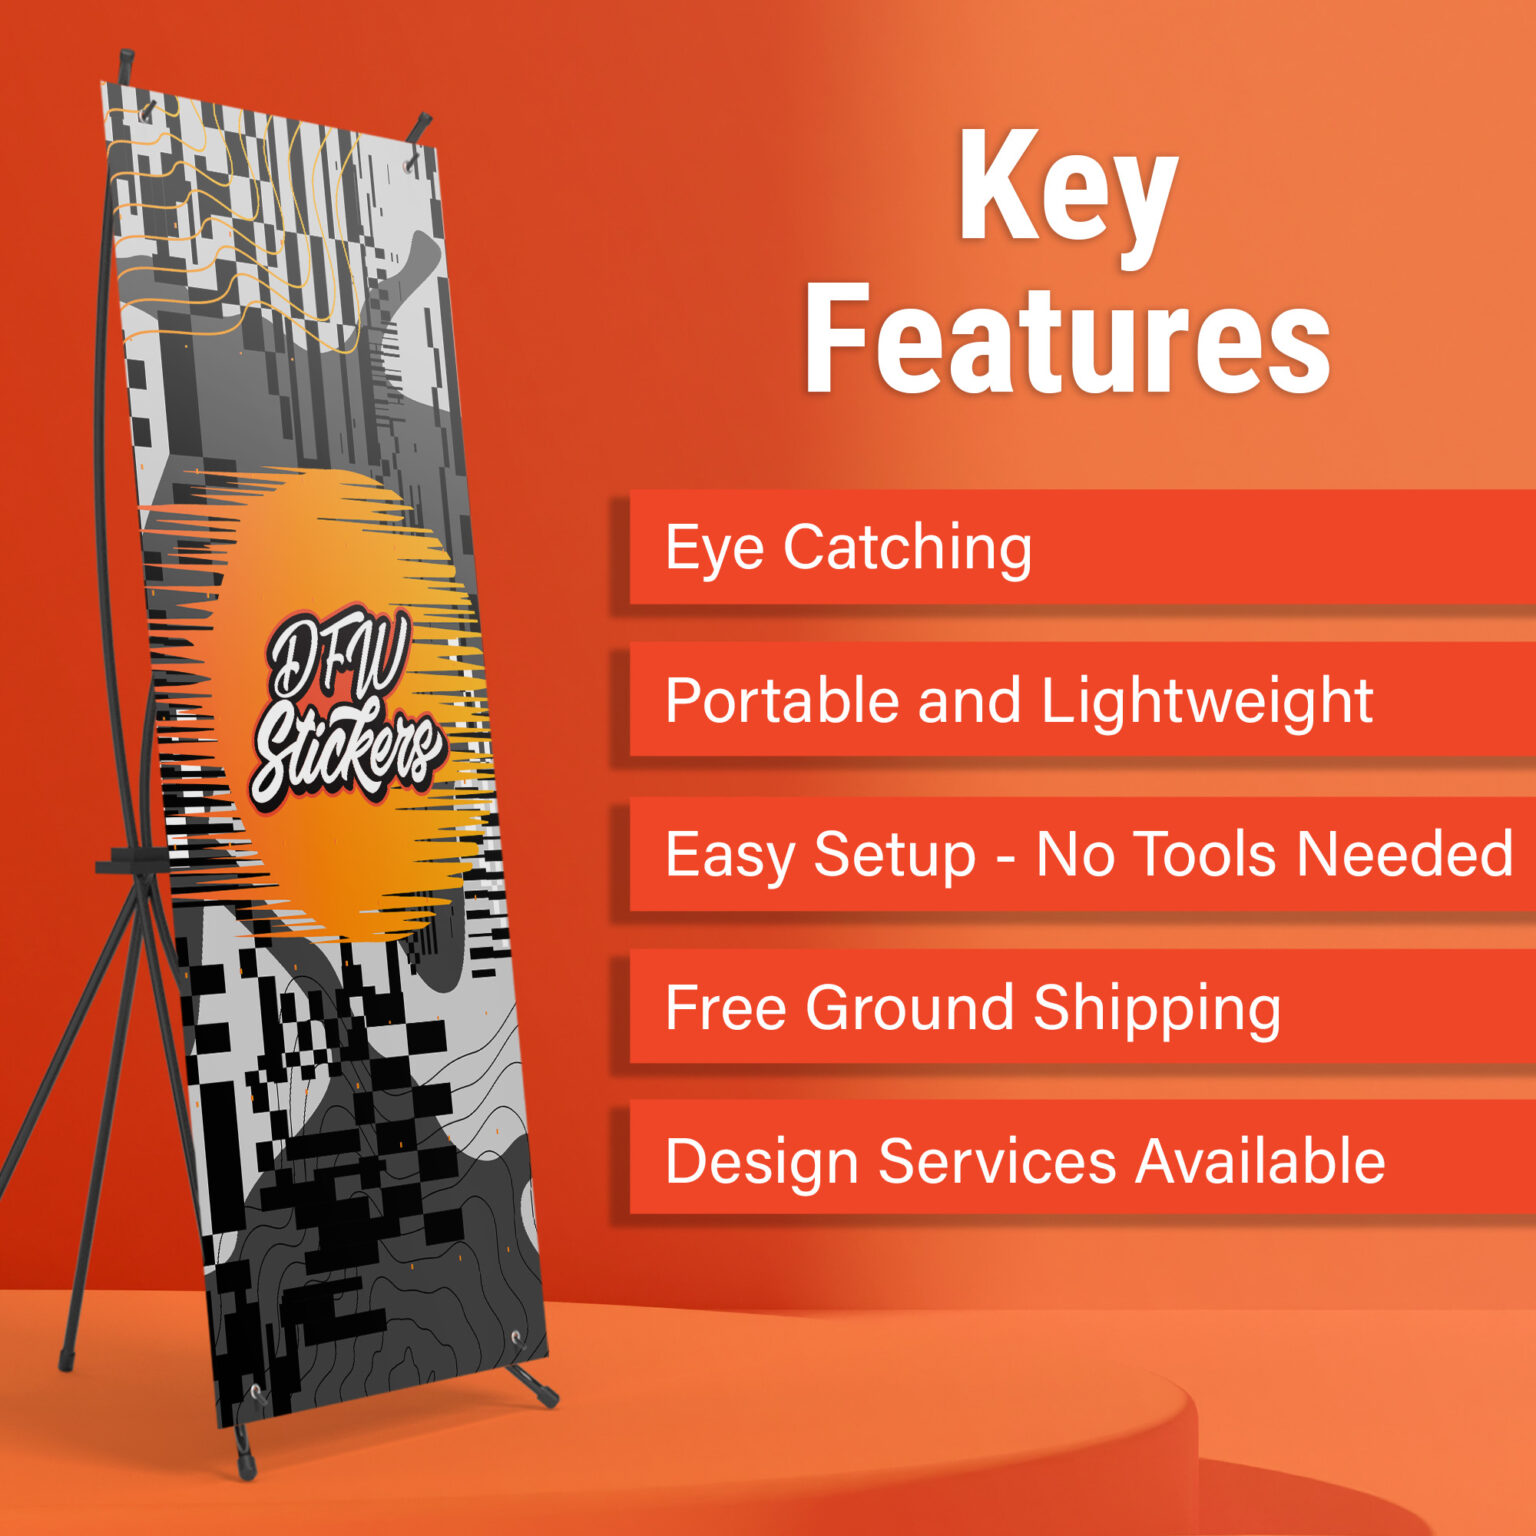 DFW Stickers Collapsible banner stand, key features